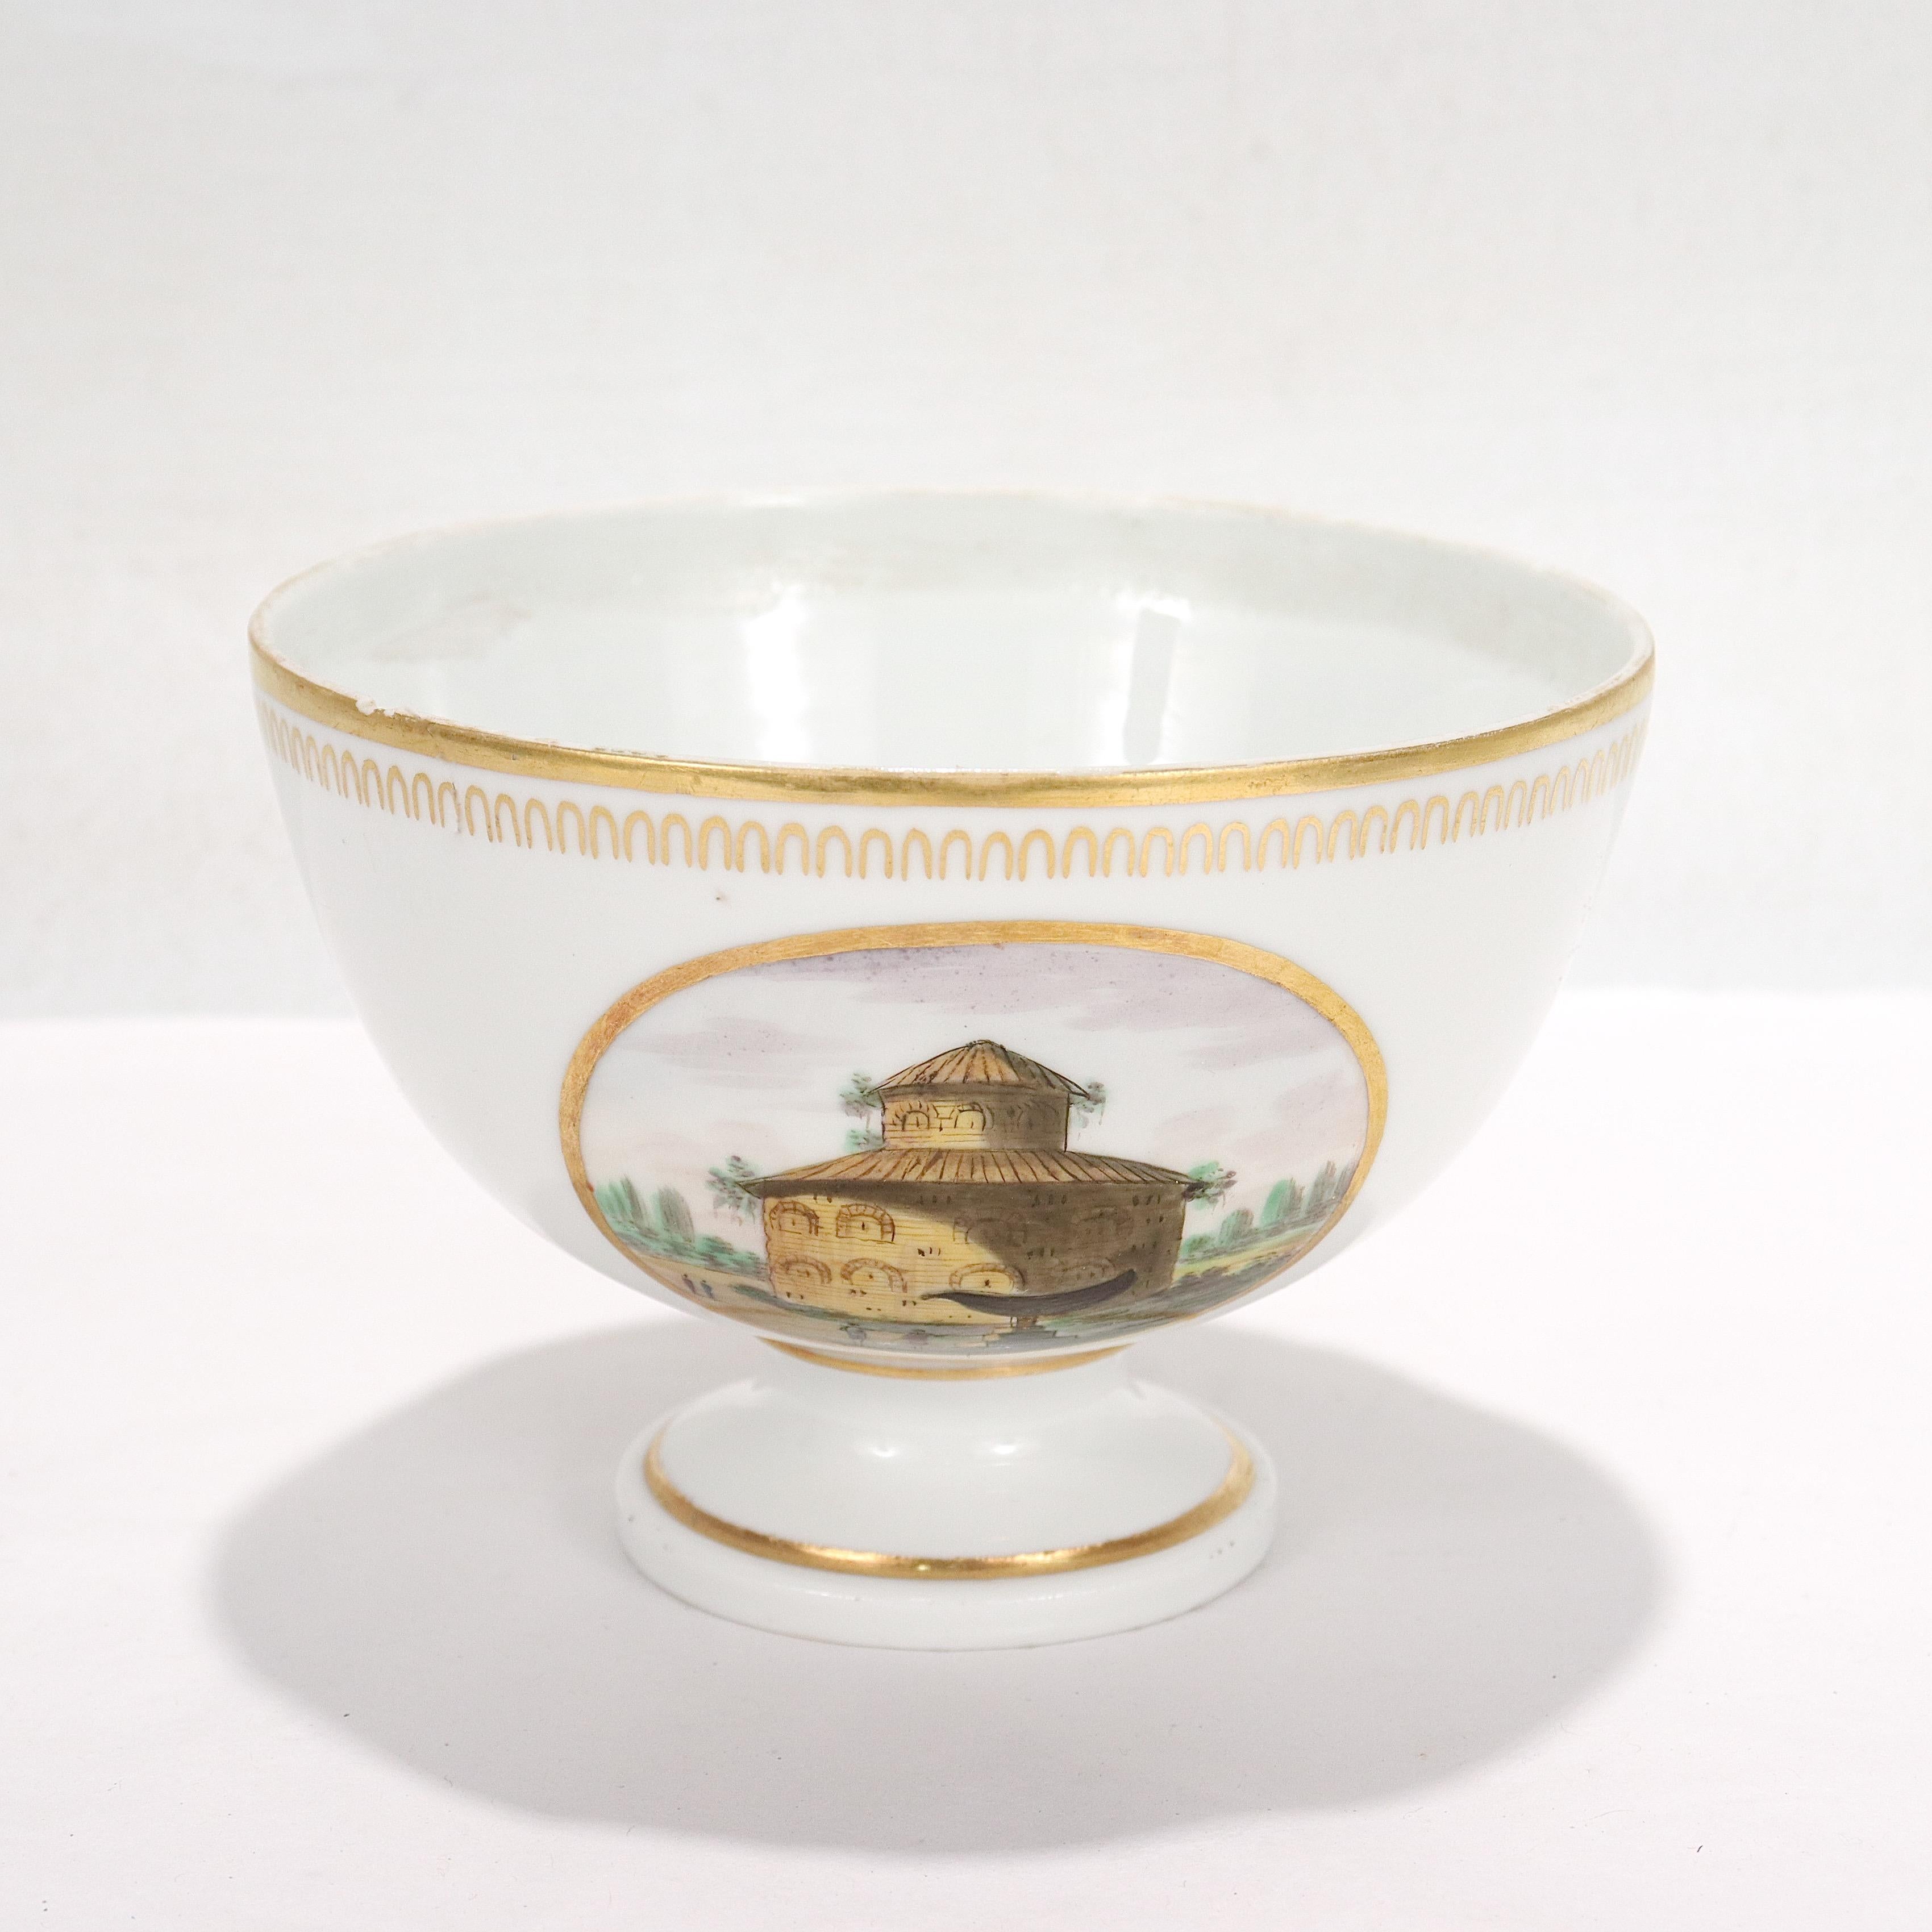 Antique Doccia Porcelain Italian Neoclassical Topographical Waste Bowl In Good Condition For Sale In Philadelphia, PA